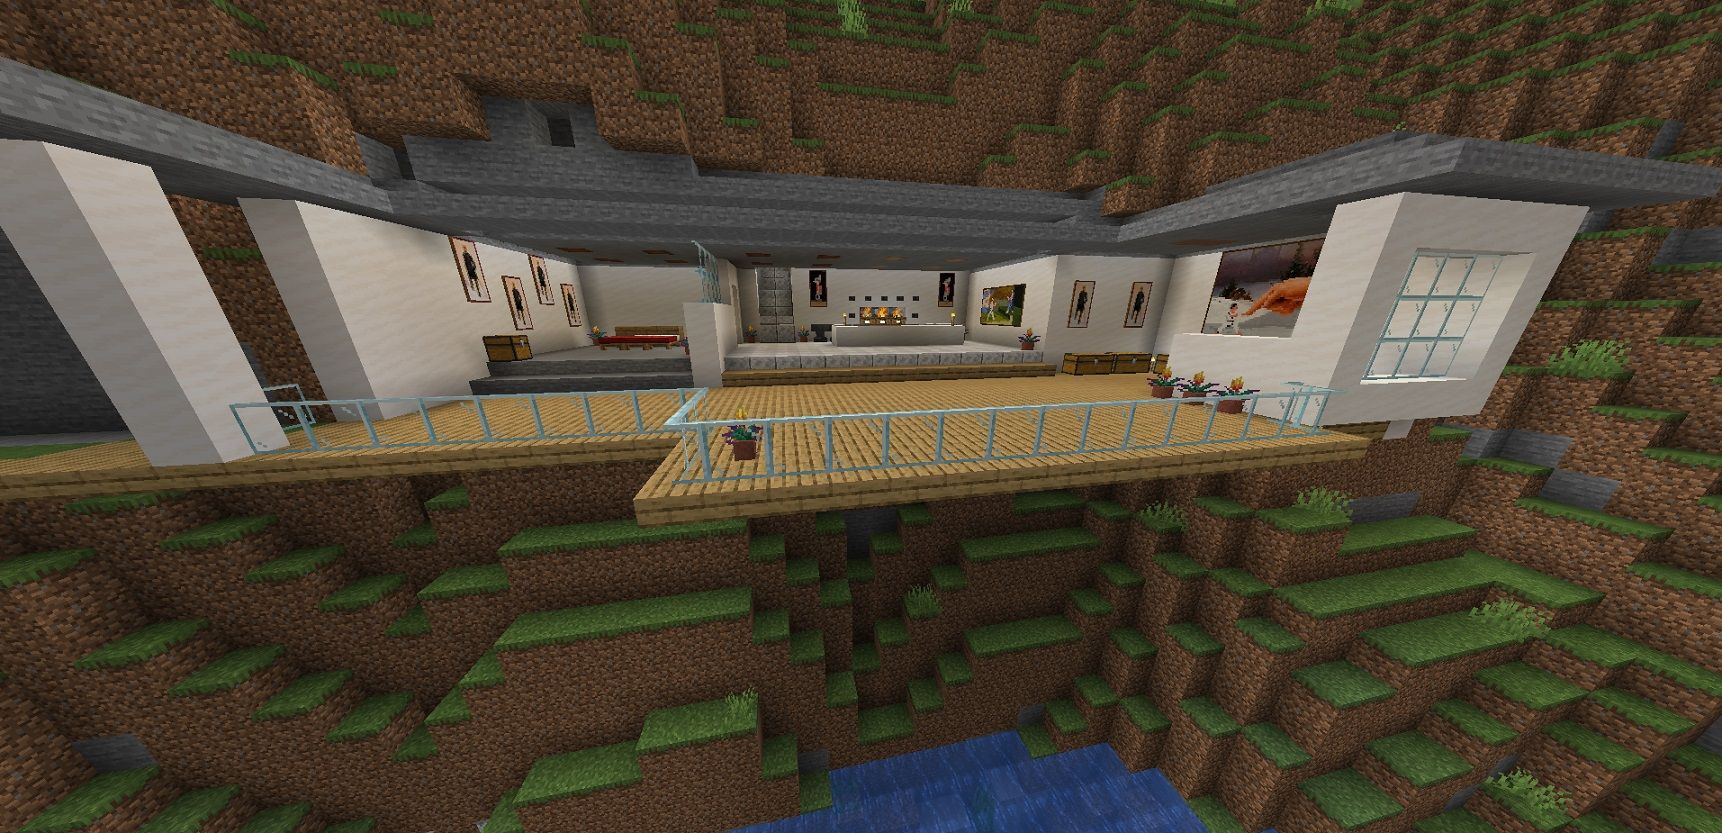 A house in Minecraft built into the side of a cliff